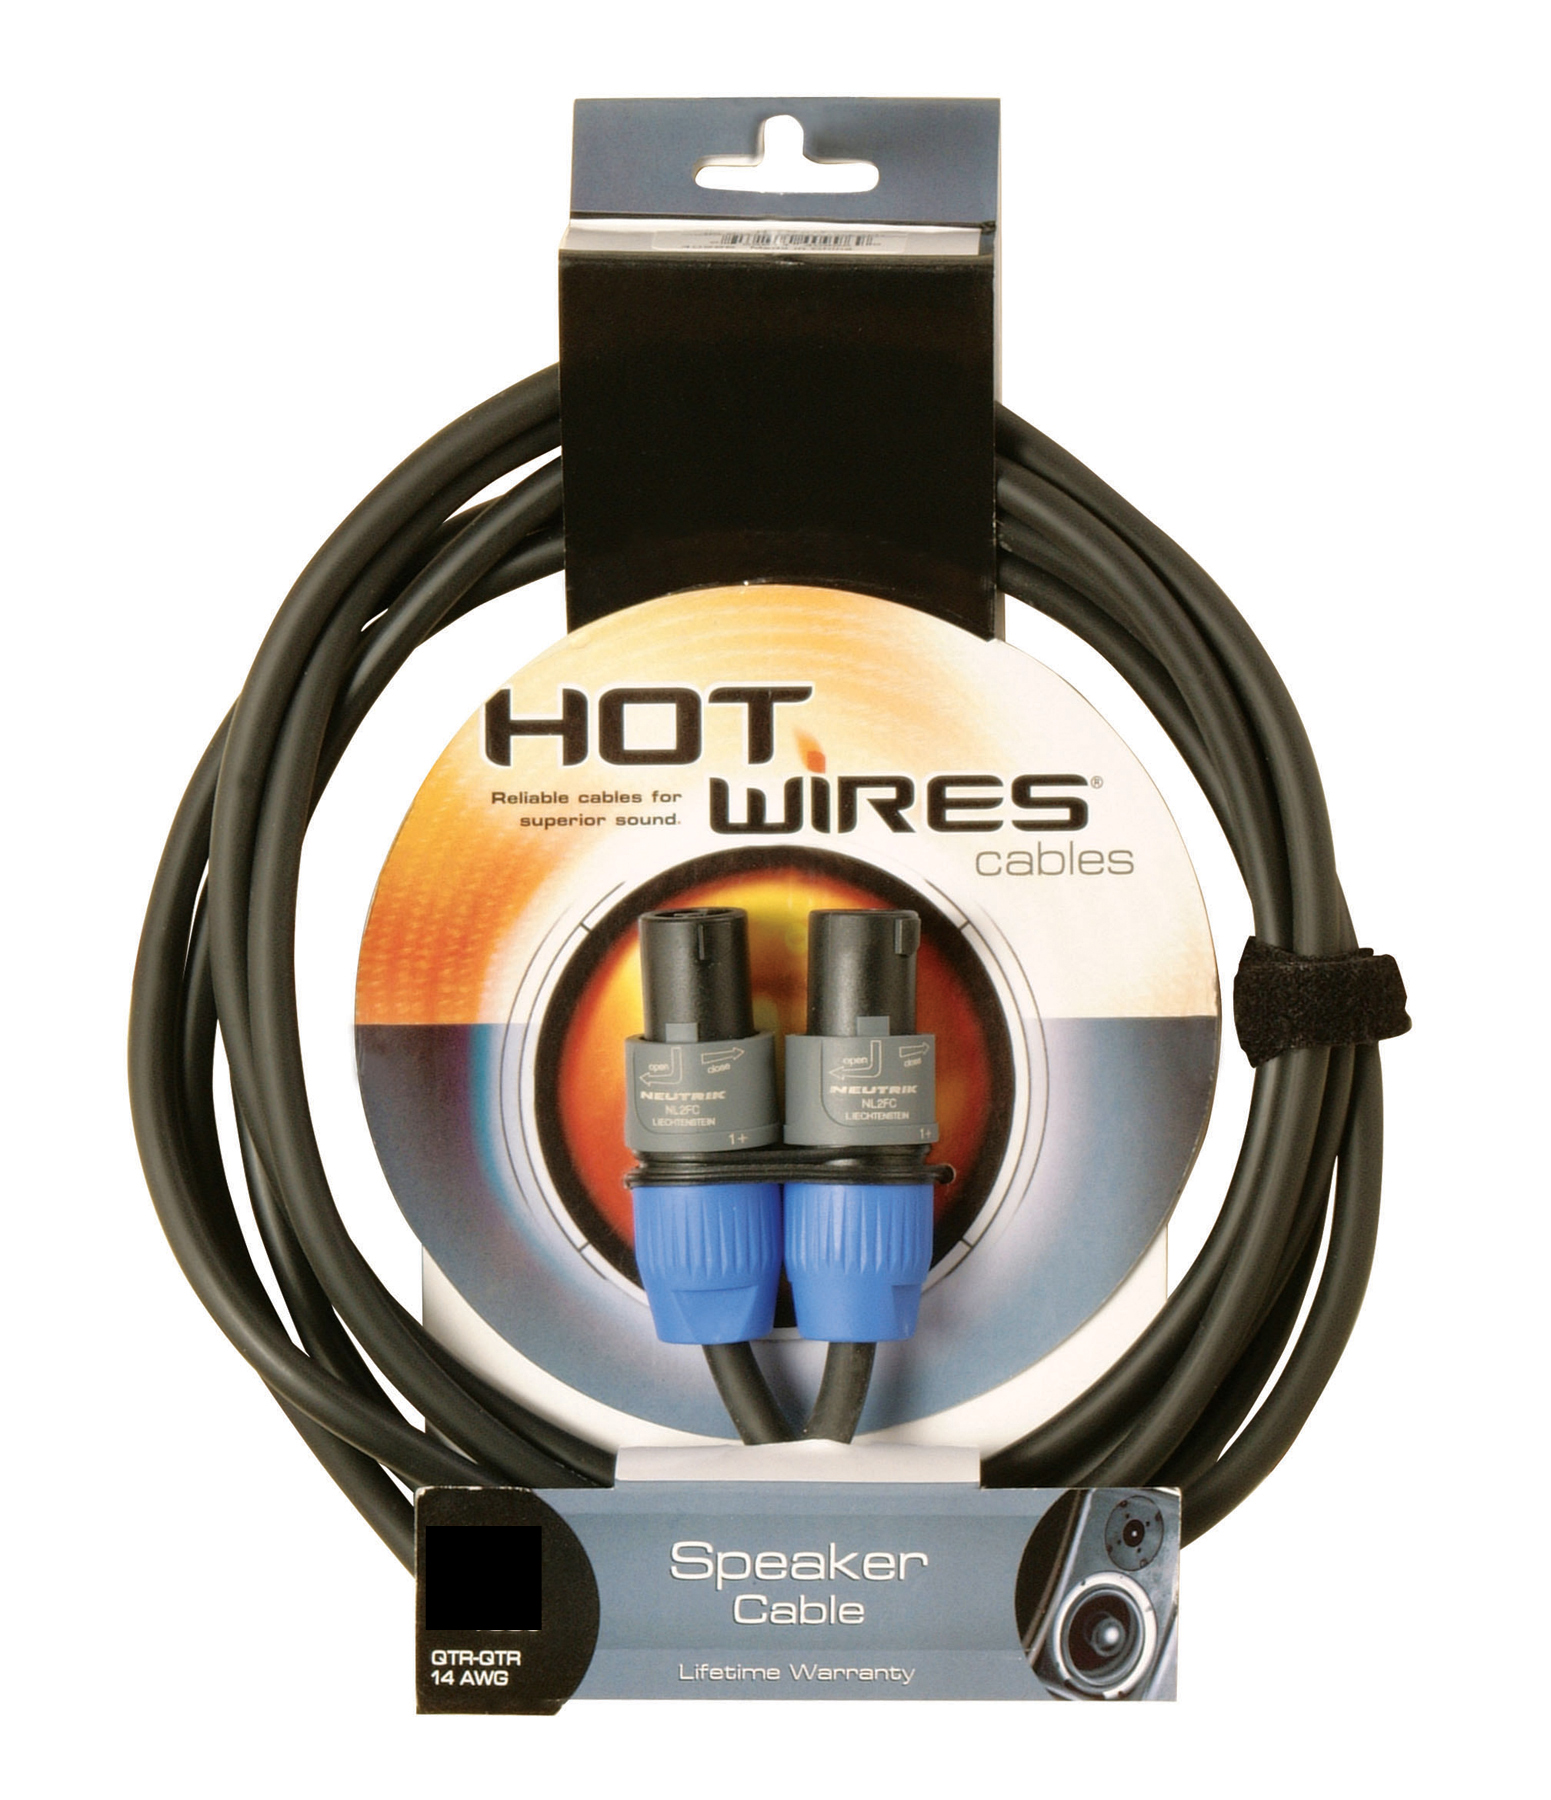 Hot Wires Hot Wires Speakon Cable for Speakers (25 Foot)